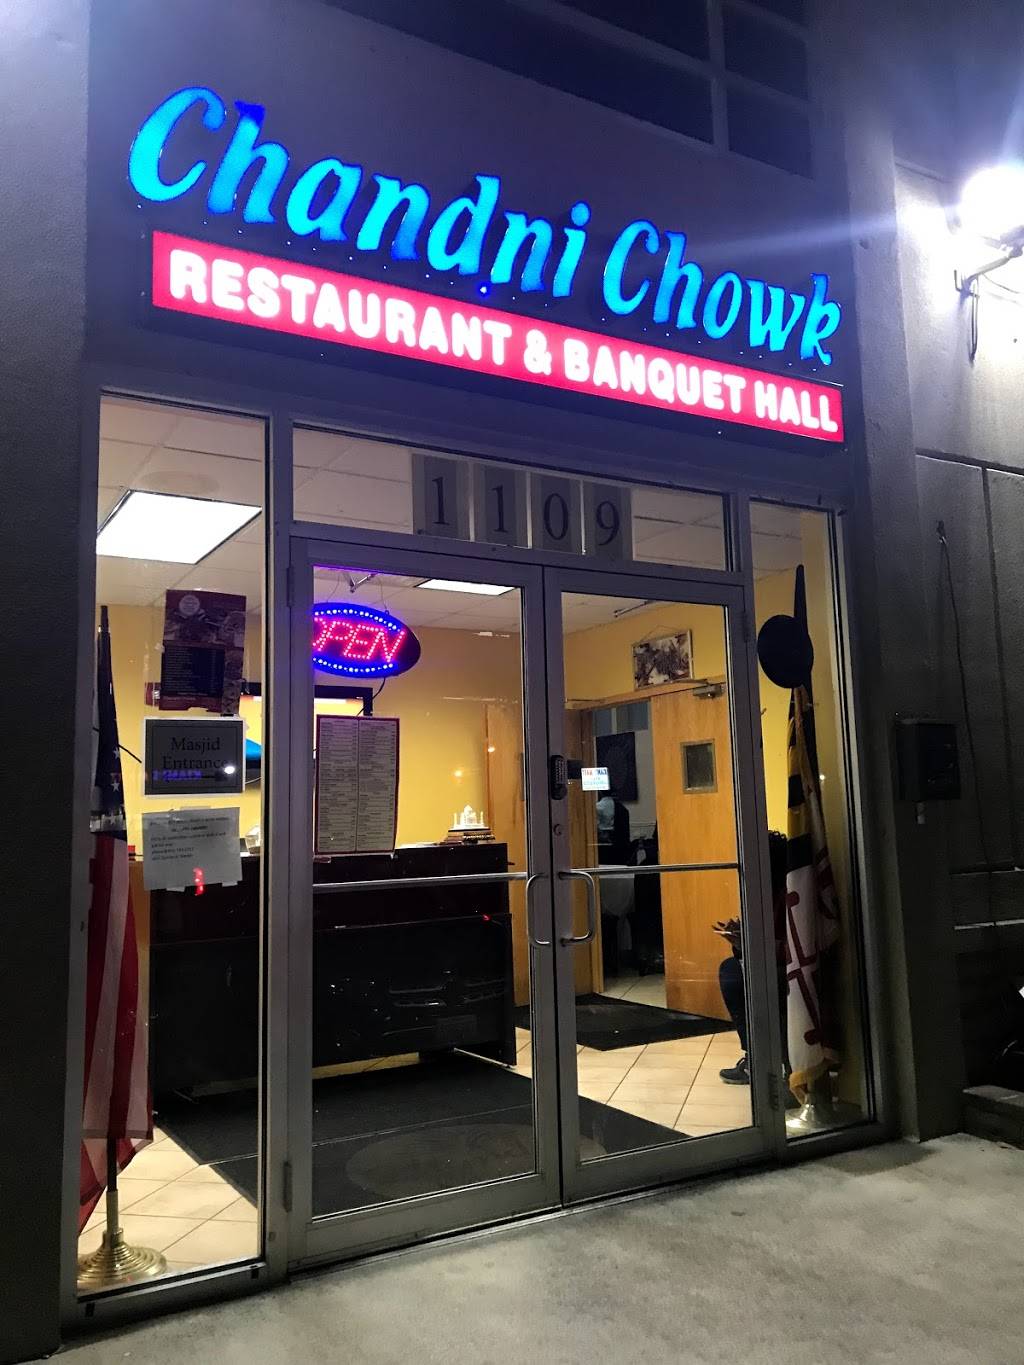 Chandni Chowk Restaurant and Banquet Hall | restaurant | 1109 Ingleside Ave, Baltimore, MD 21207, USA | 4107441202 OR +1 410-744-1202